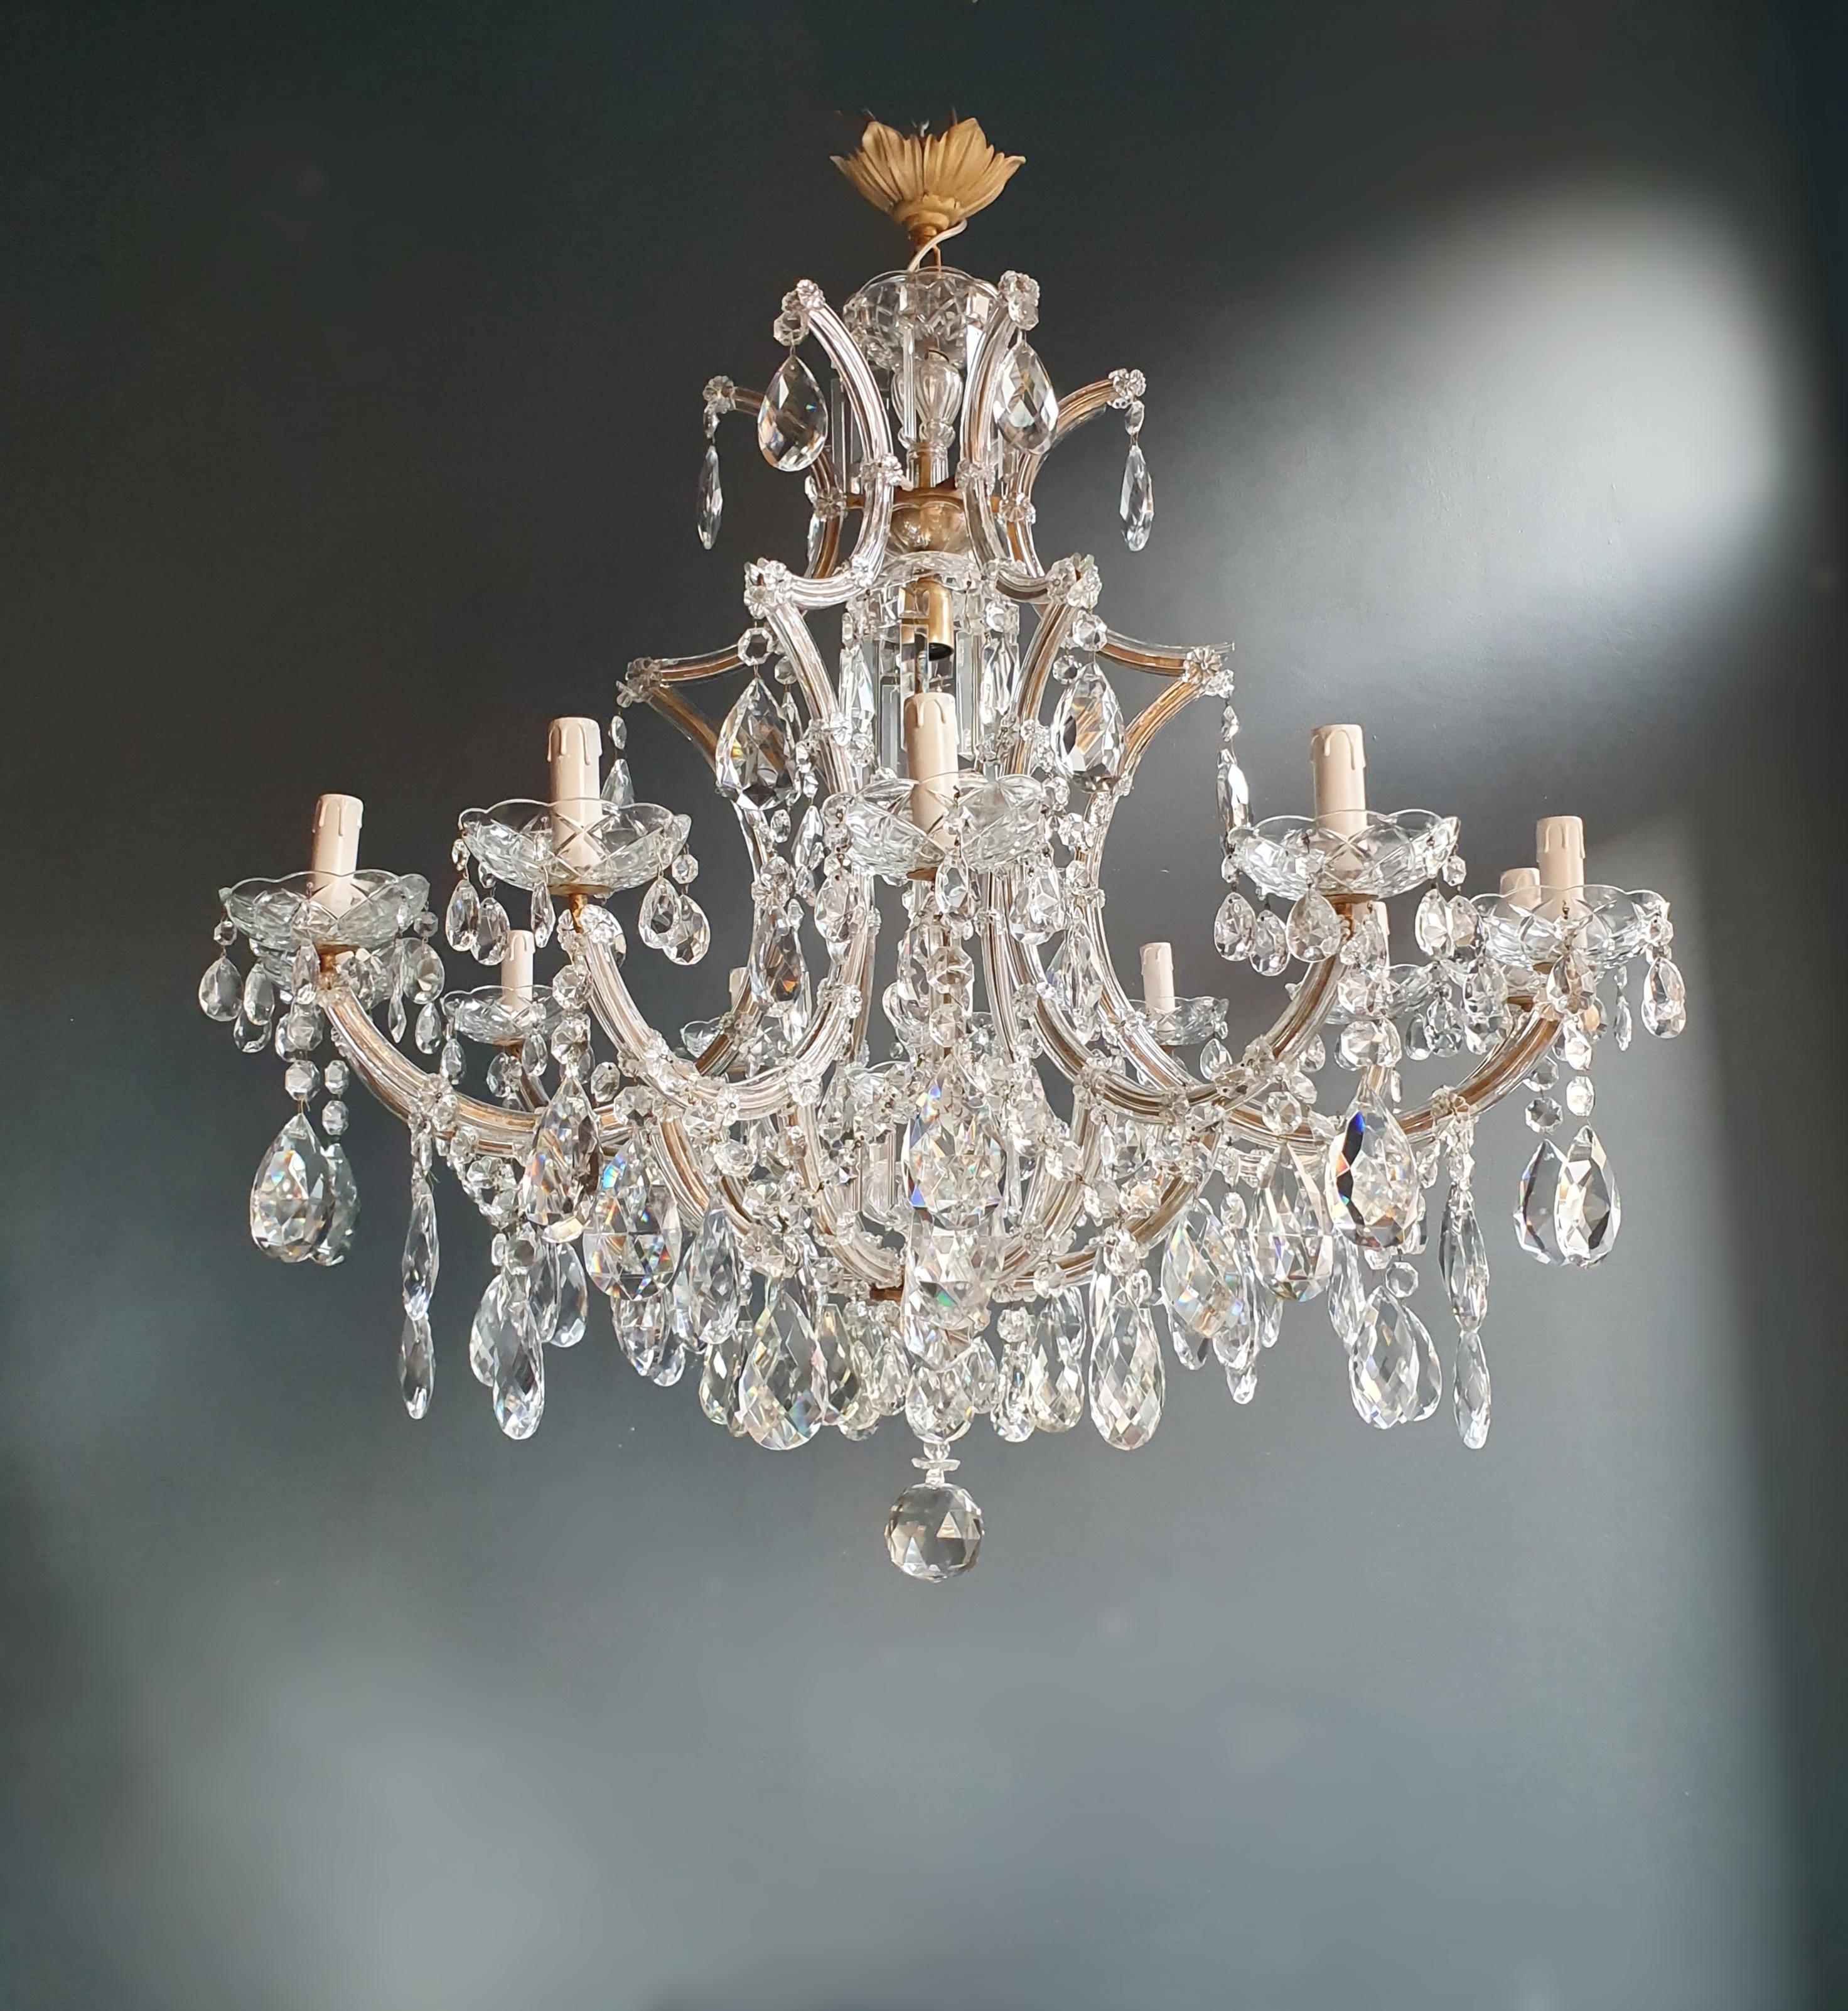 The frame is fully dressed all-over with glass. Cut crystal drops of different dimensions and shapes are hanging all-over the octagonal button chains, all around the chandelier.

Measures: Total height 150 cm, height without chain 95 cm, diameter